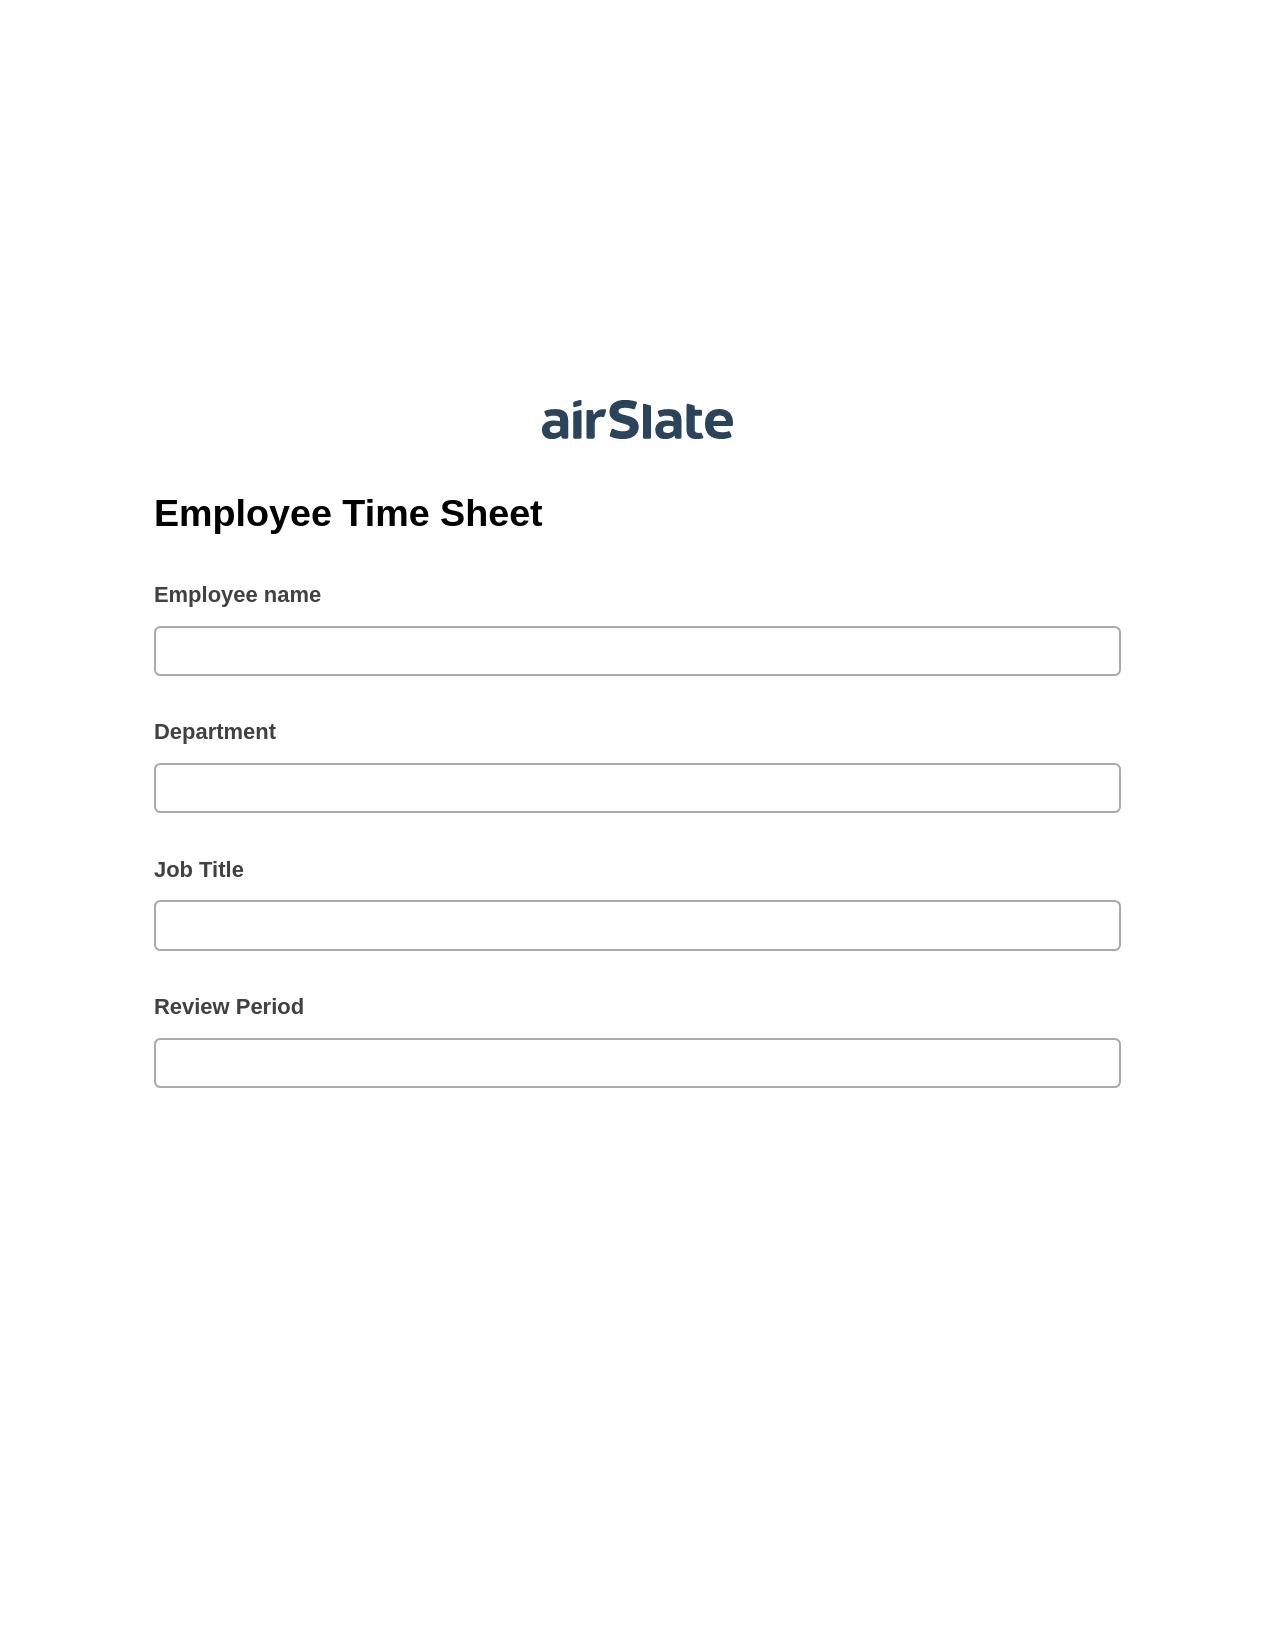 Employee Time Sheet Pre-fill Dropdowns from CSV file Bot, Custom Field's Value Bot, Email Notification Postfinish Bot